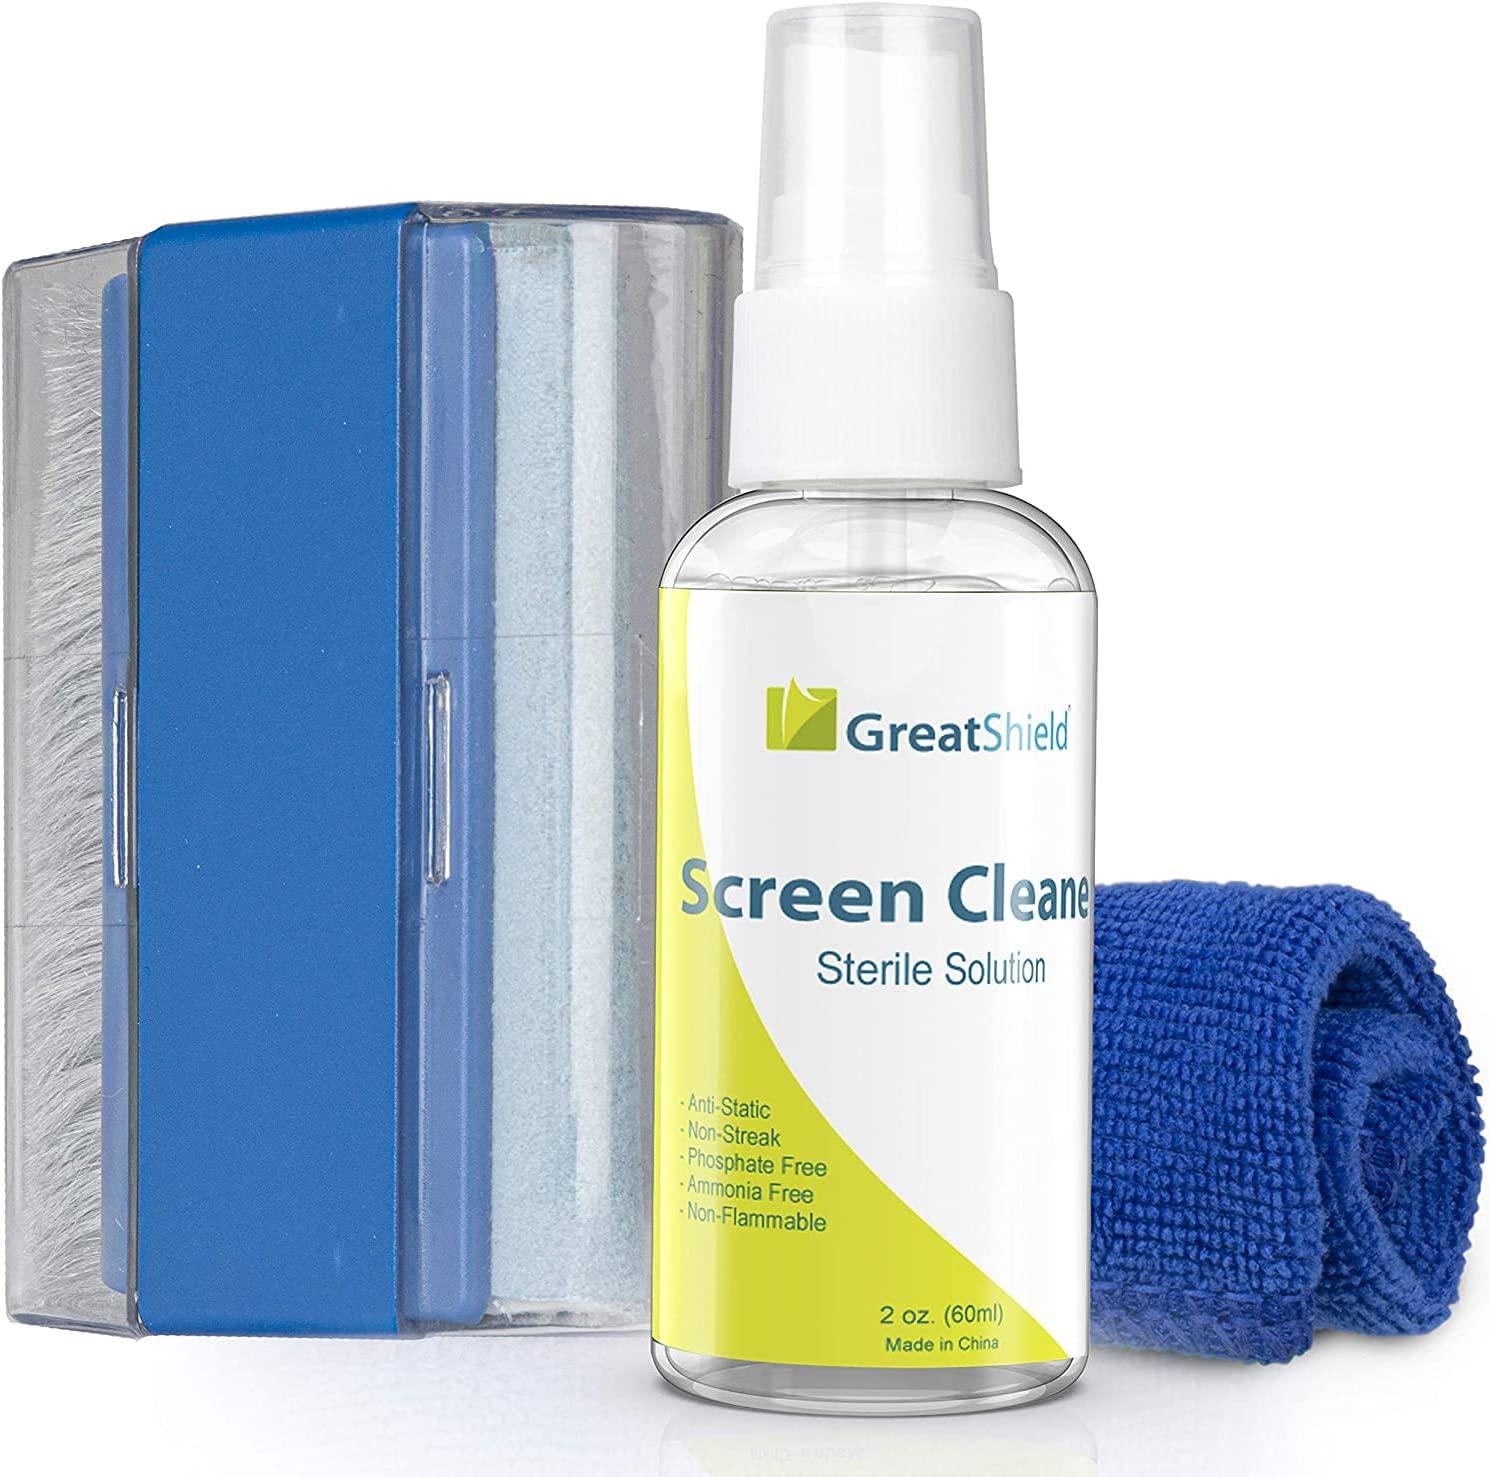 GreatShield, GreatShield LCD Touchscreen Cleaning Kit with Microfiber Cloth, Brush, Non-Alcoholic Spray Solution for Laptops, PC Monitors, Smartphones, Tablets, LED, TVs, DSLR Cameras, Camcorders